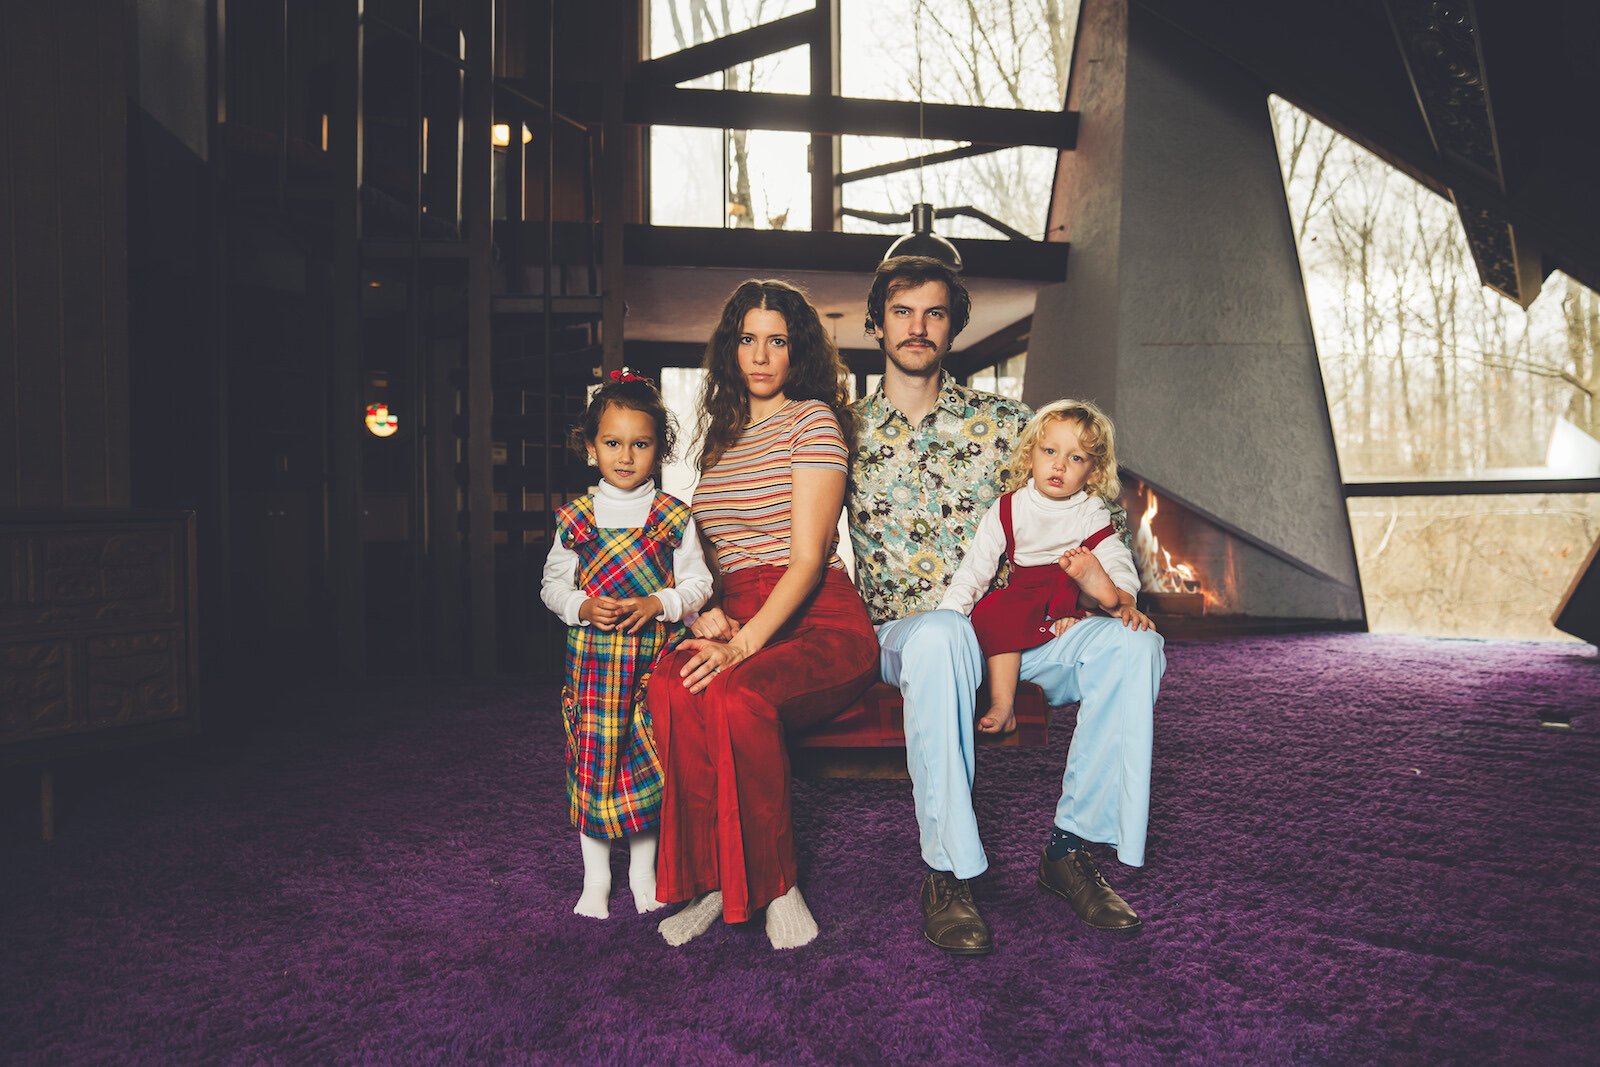 The Jackson family did a fun 70s-themed photoshoot with Fort Wayne photographer Dustin McKibben as a tribute to the home's design.